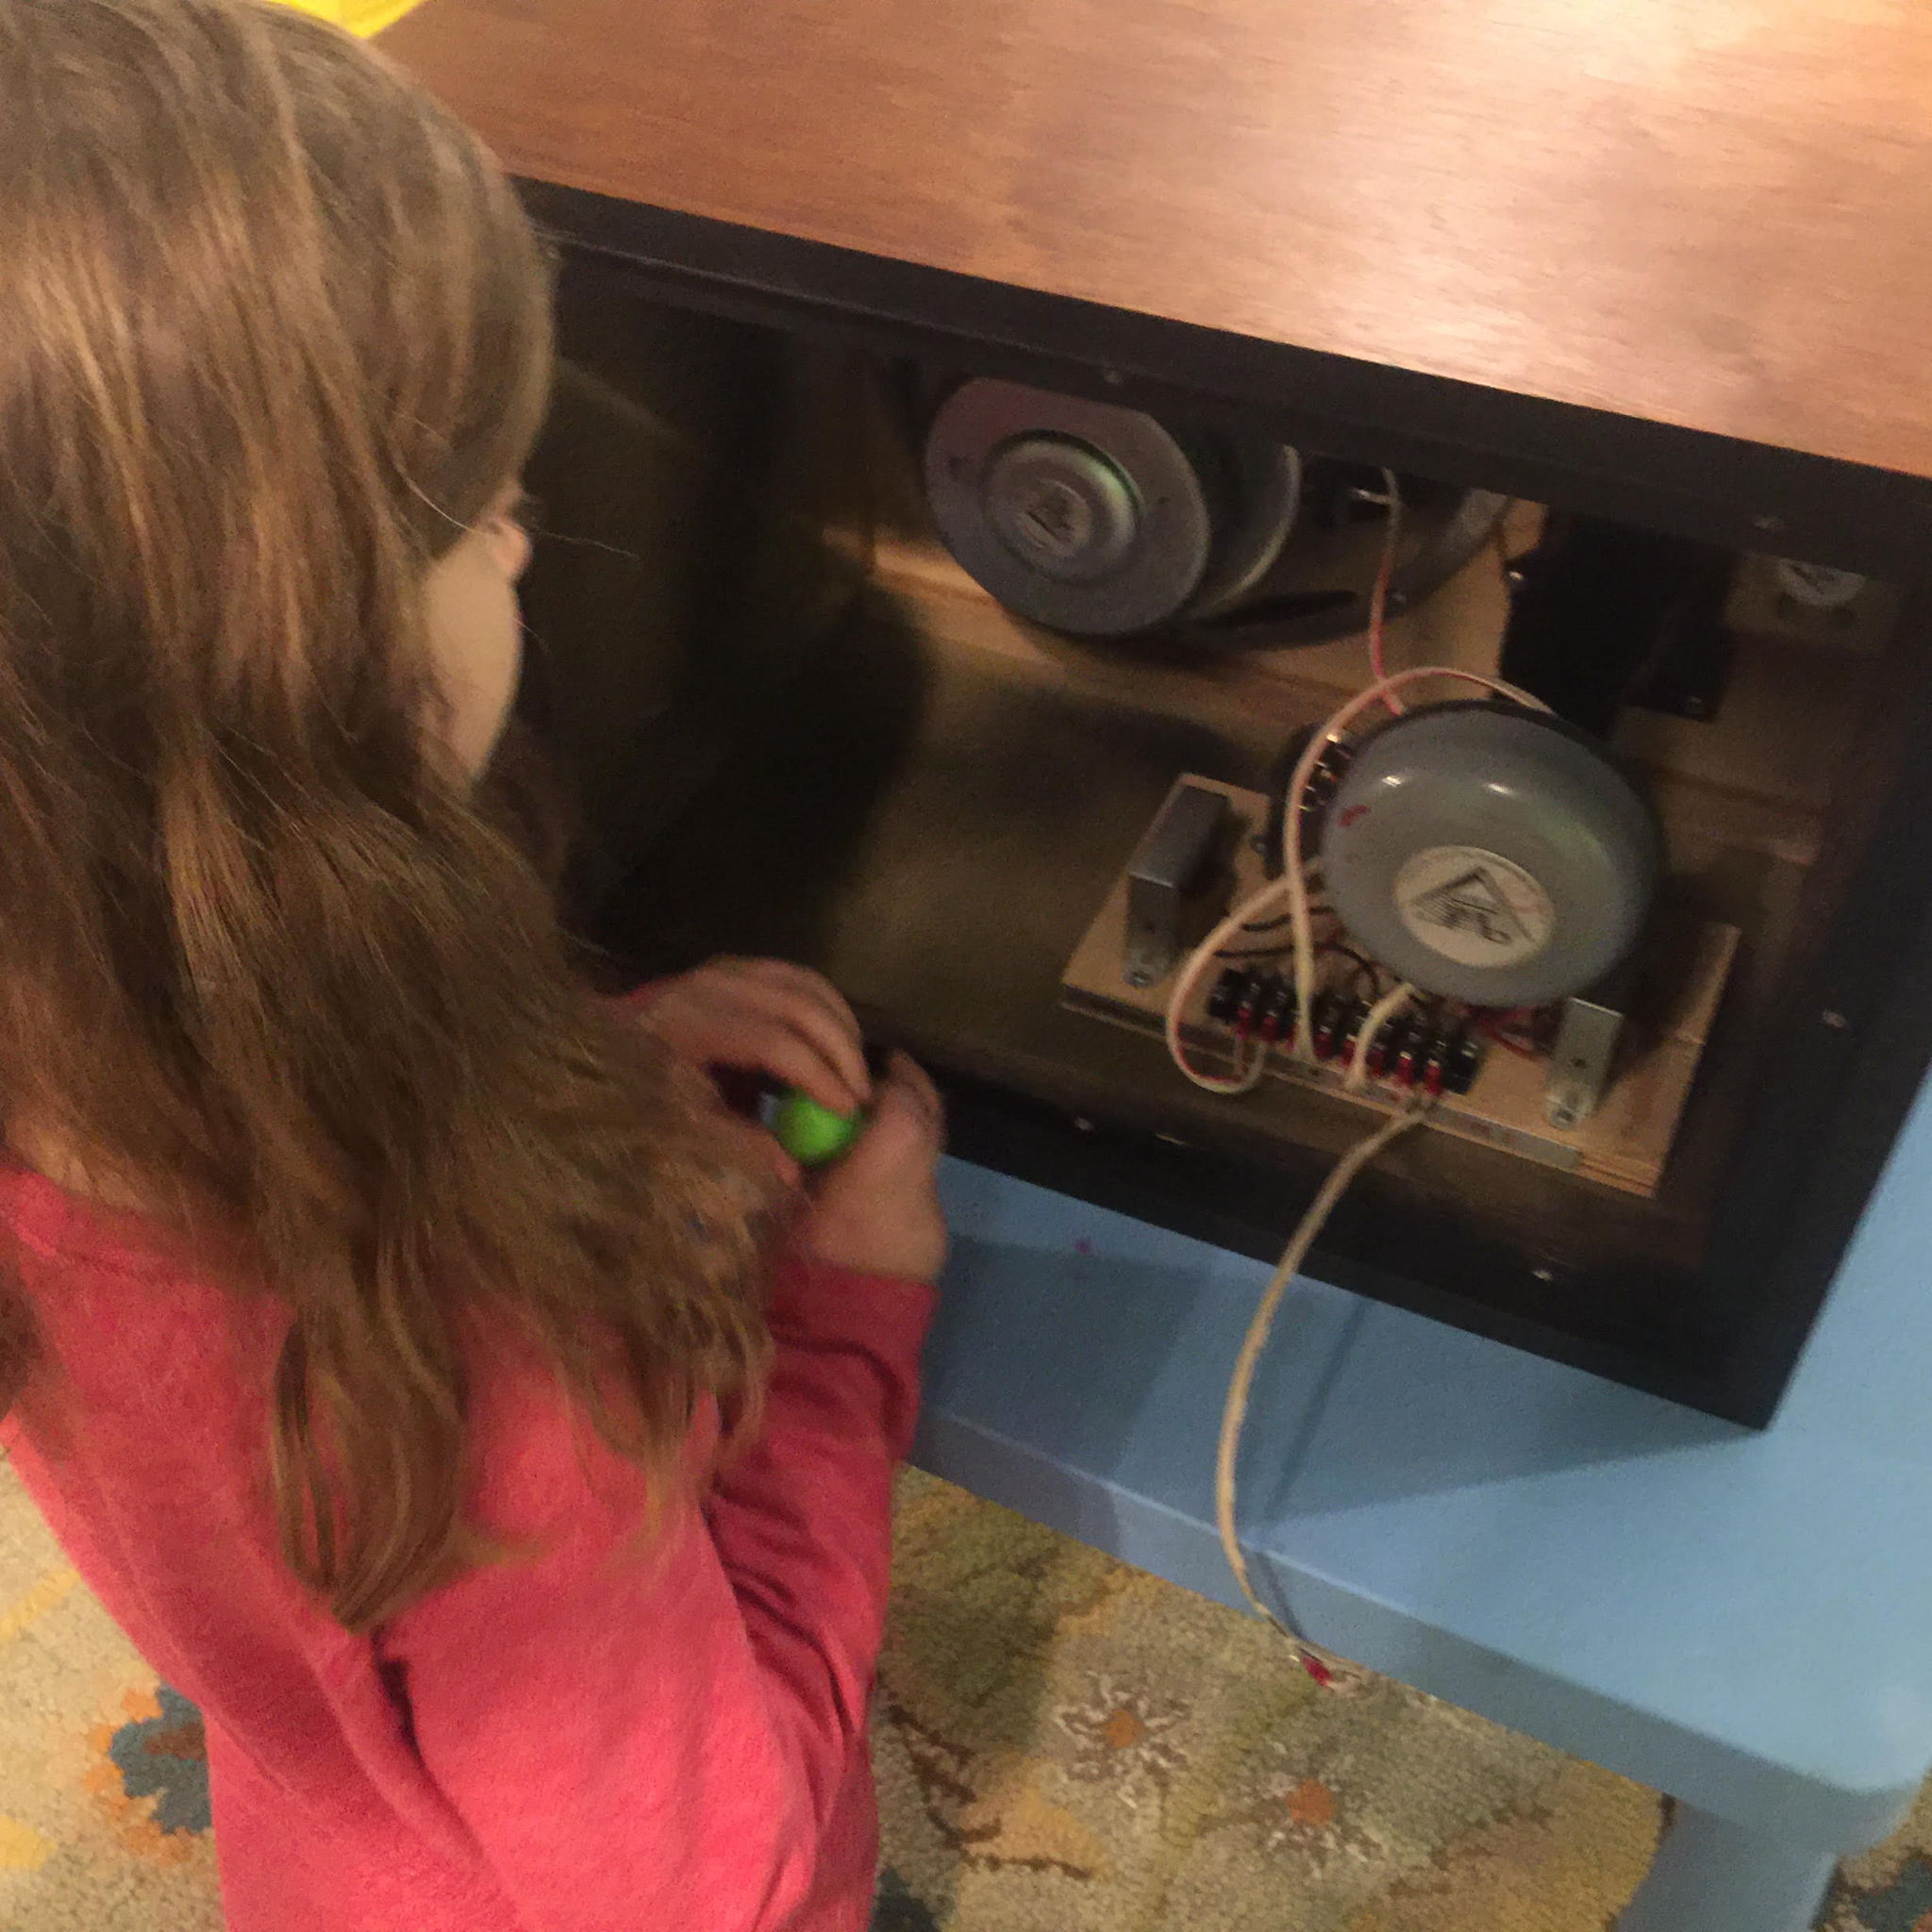 Revamping Klipsch Heresies as a family project